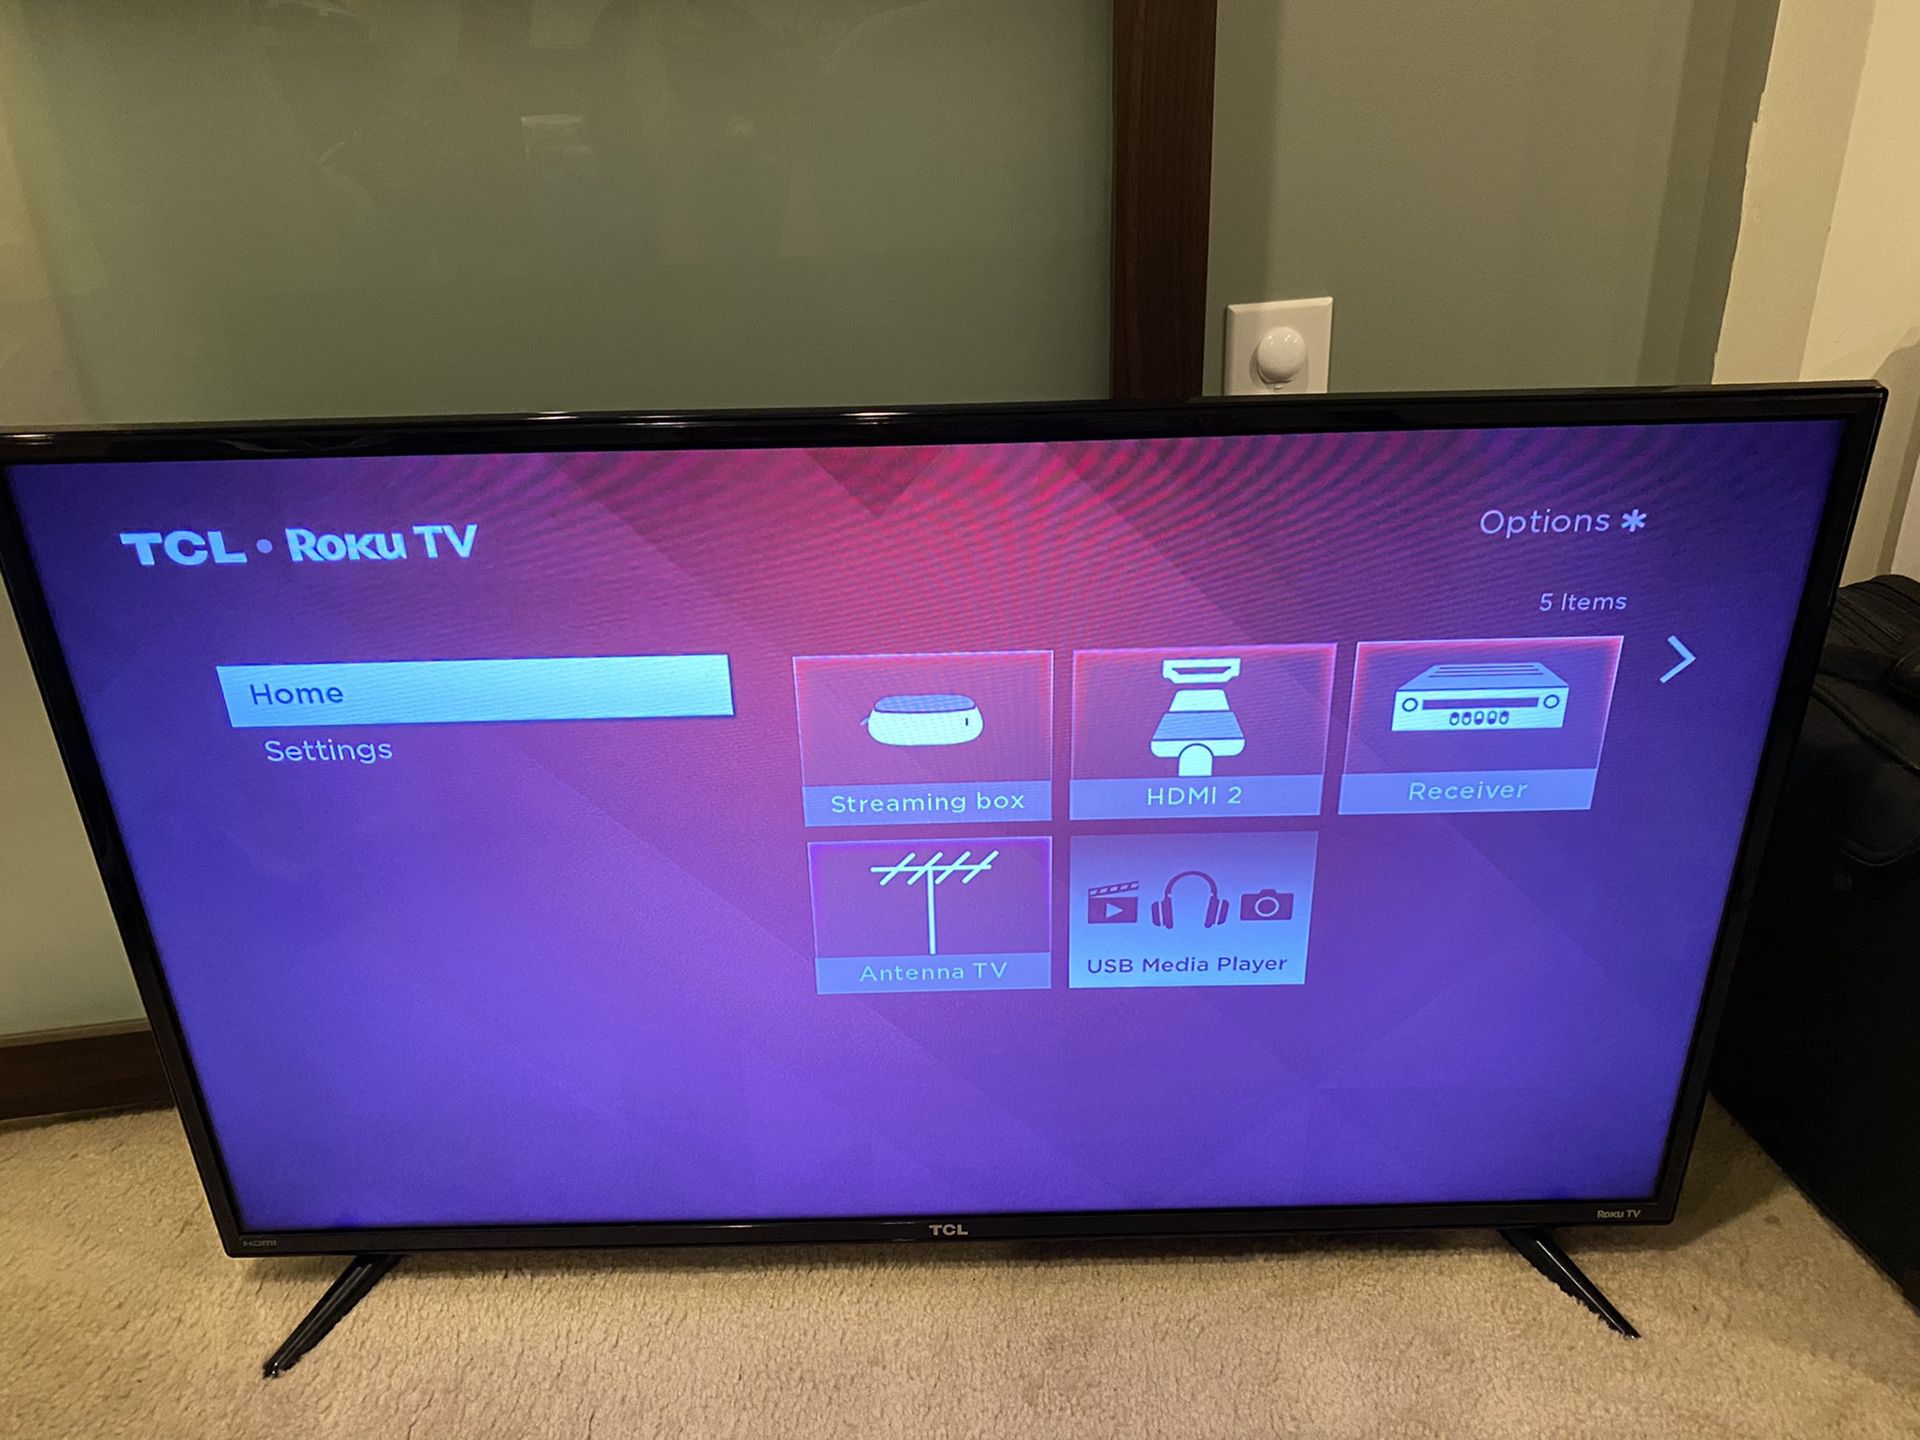 40” TCL flat screen smart function does not work